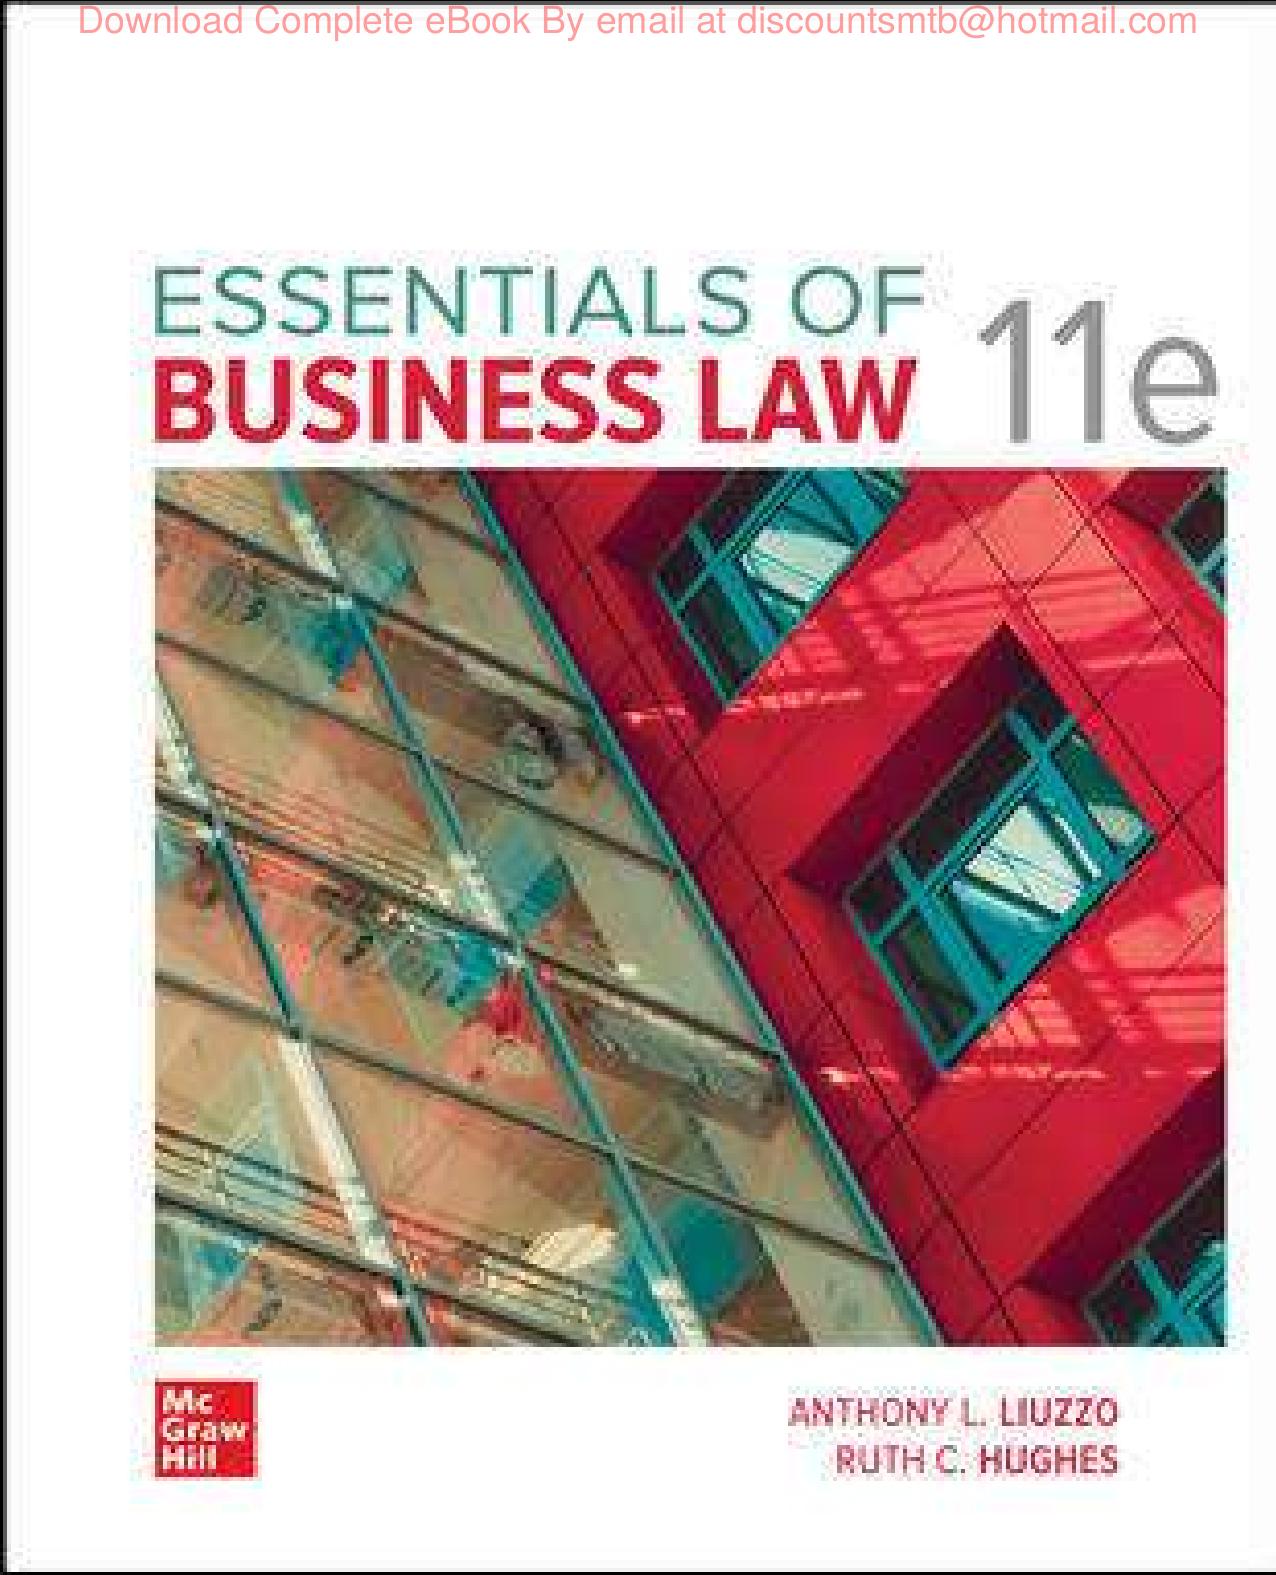 Essentials of Business Law by Anthony Liuzzo Ruth Hughes